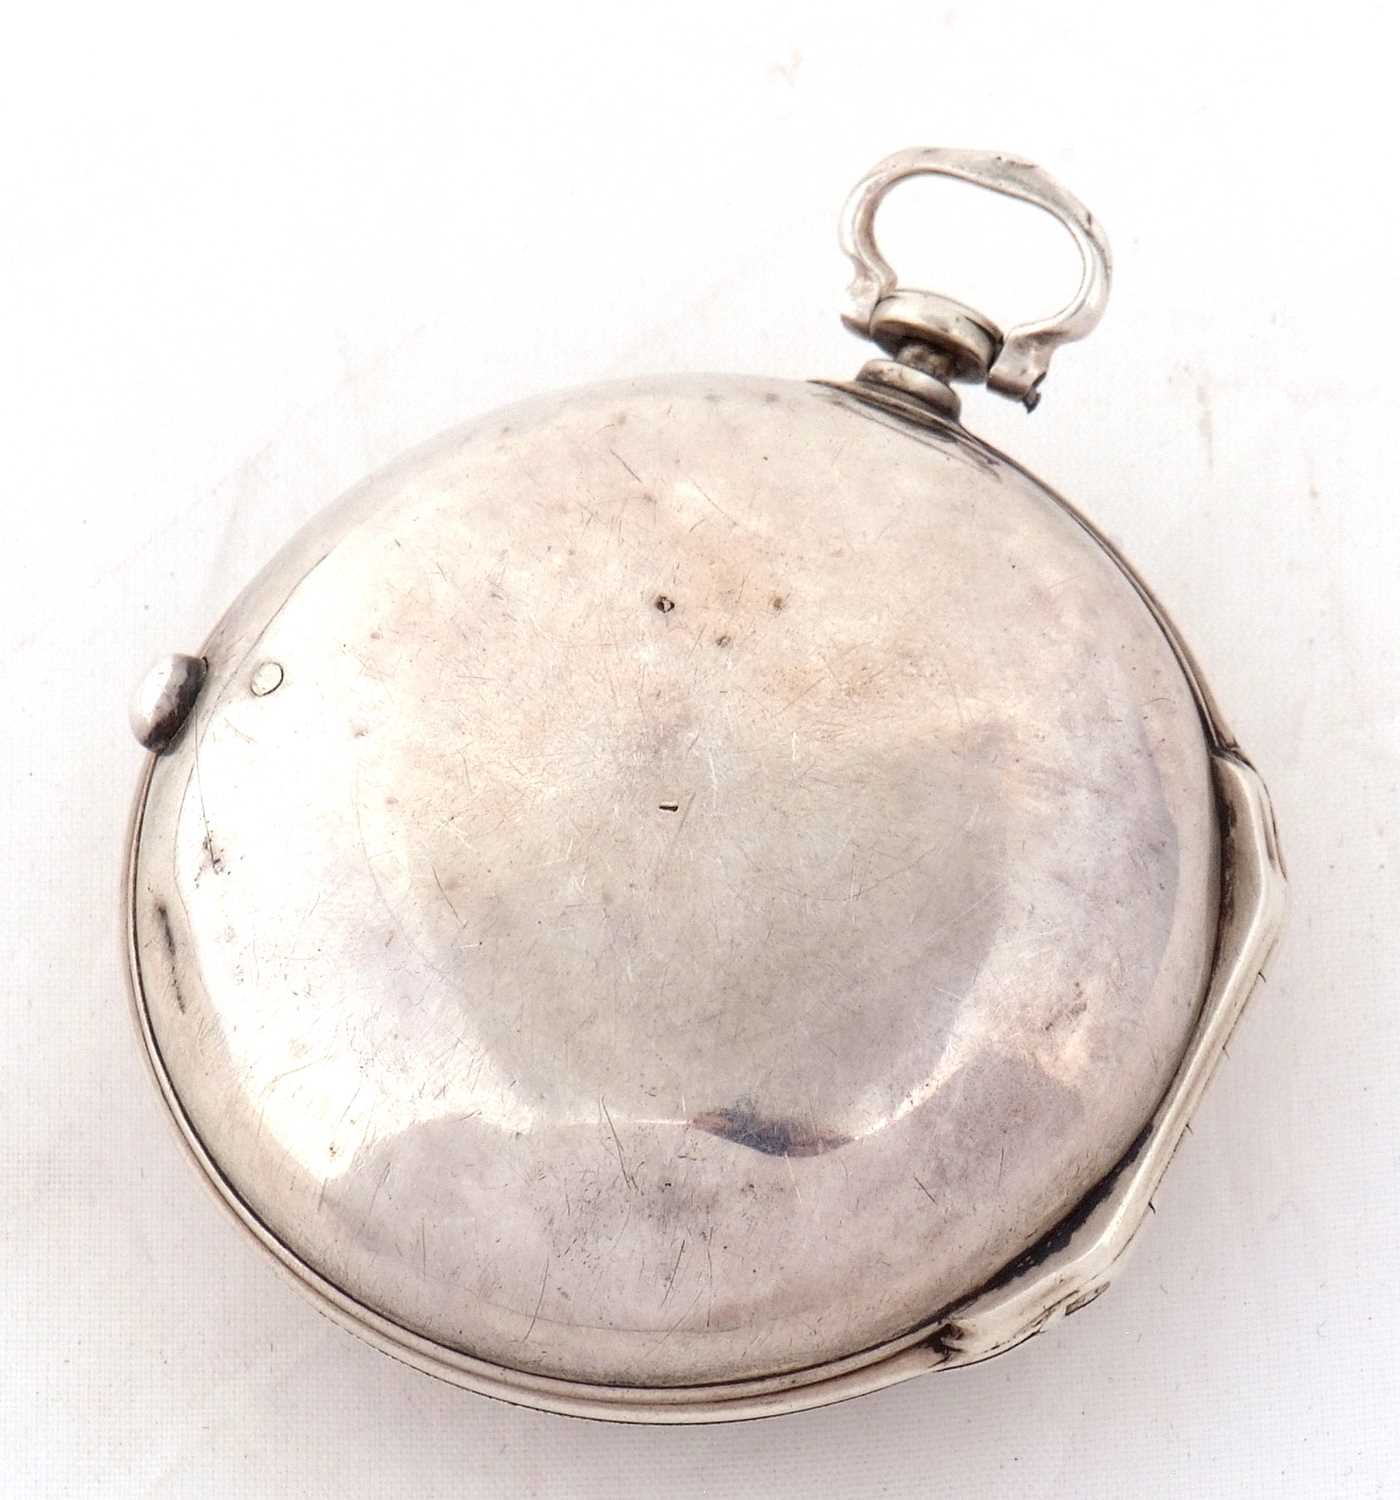 A Massingham of Fakenham silver pair case Verge Fusee pocket watch circa 1768, hallmarked in both - Image 3 of 3